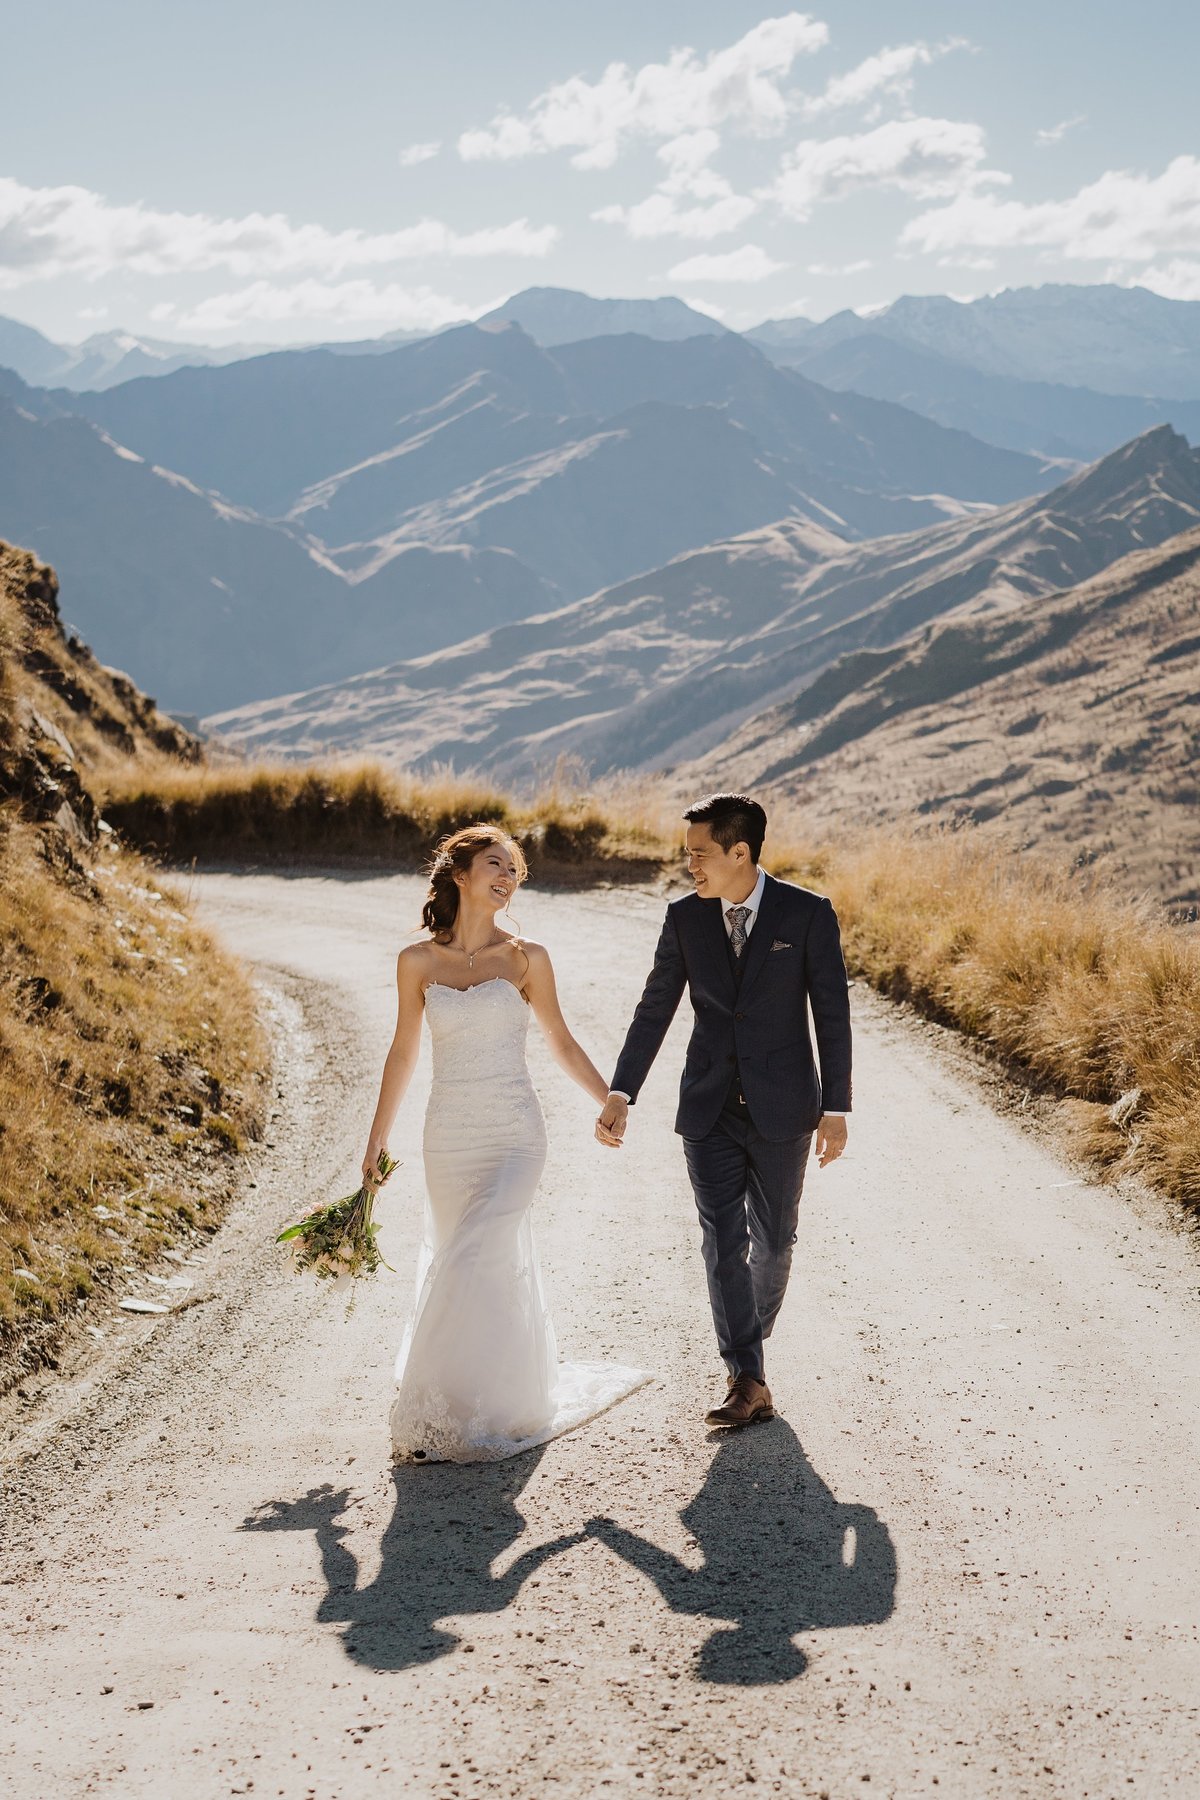 Bride and groom walking down a dirt road in the mountains